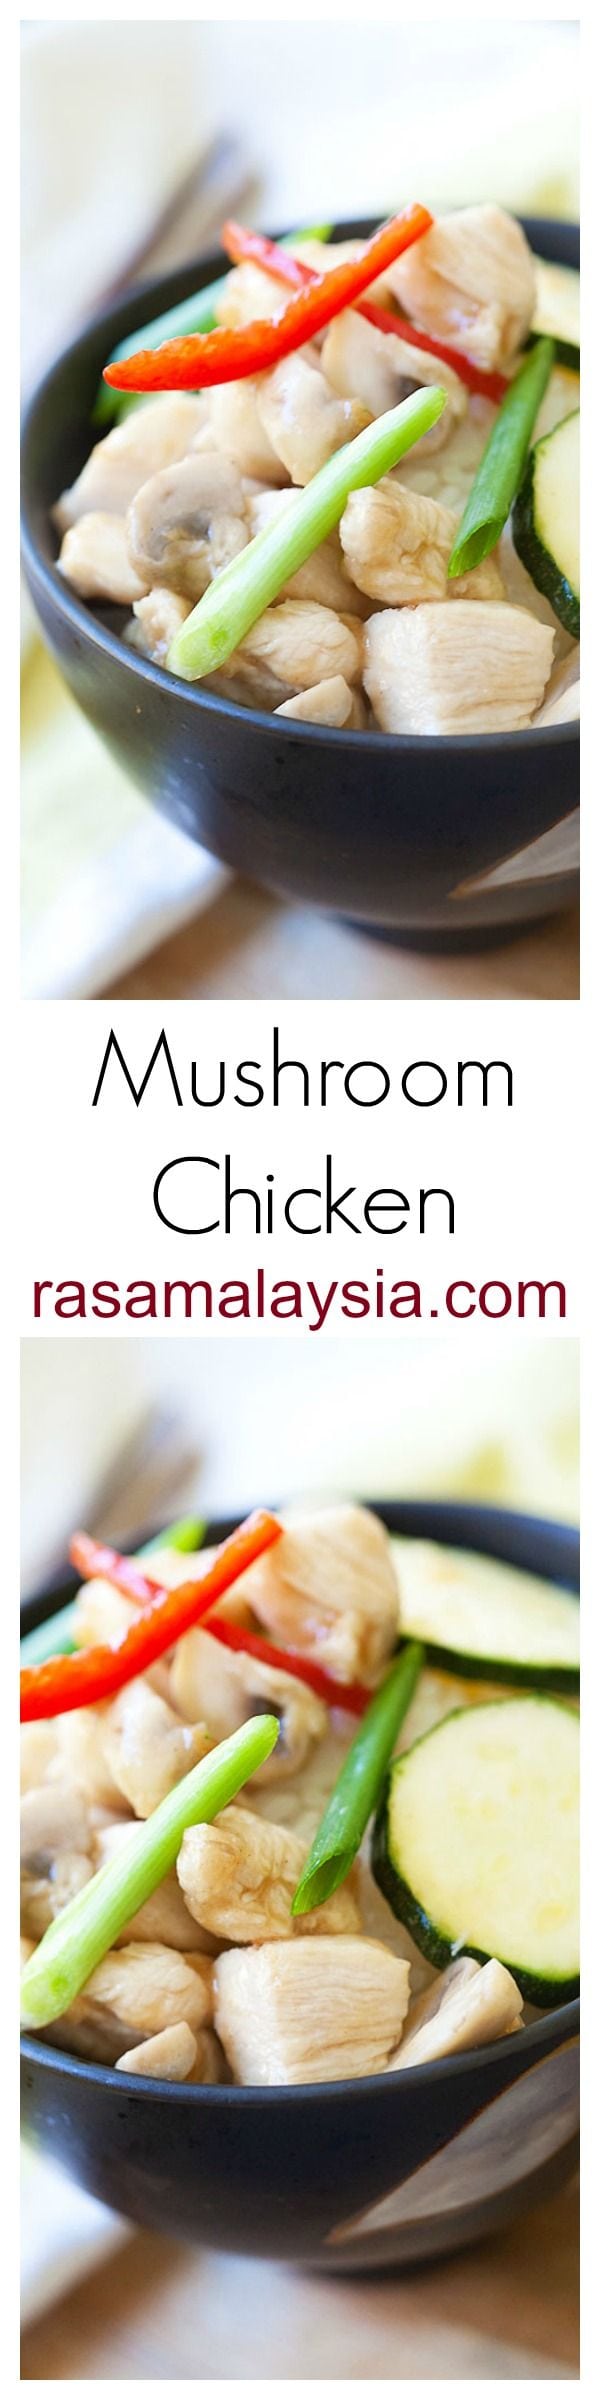 Mushroom chicken is a simple Chinese recipe with mushroom, chicken and zucchini stir-fried in a simple brown sauce. Easy and tasty mushroom chicken recipe | rasamalaysia.com